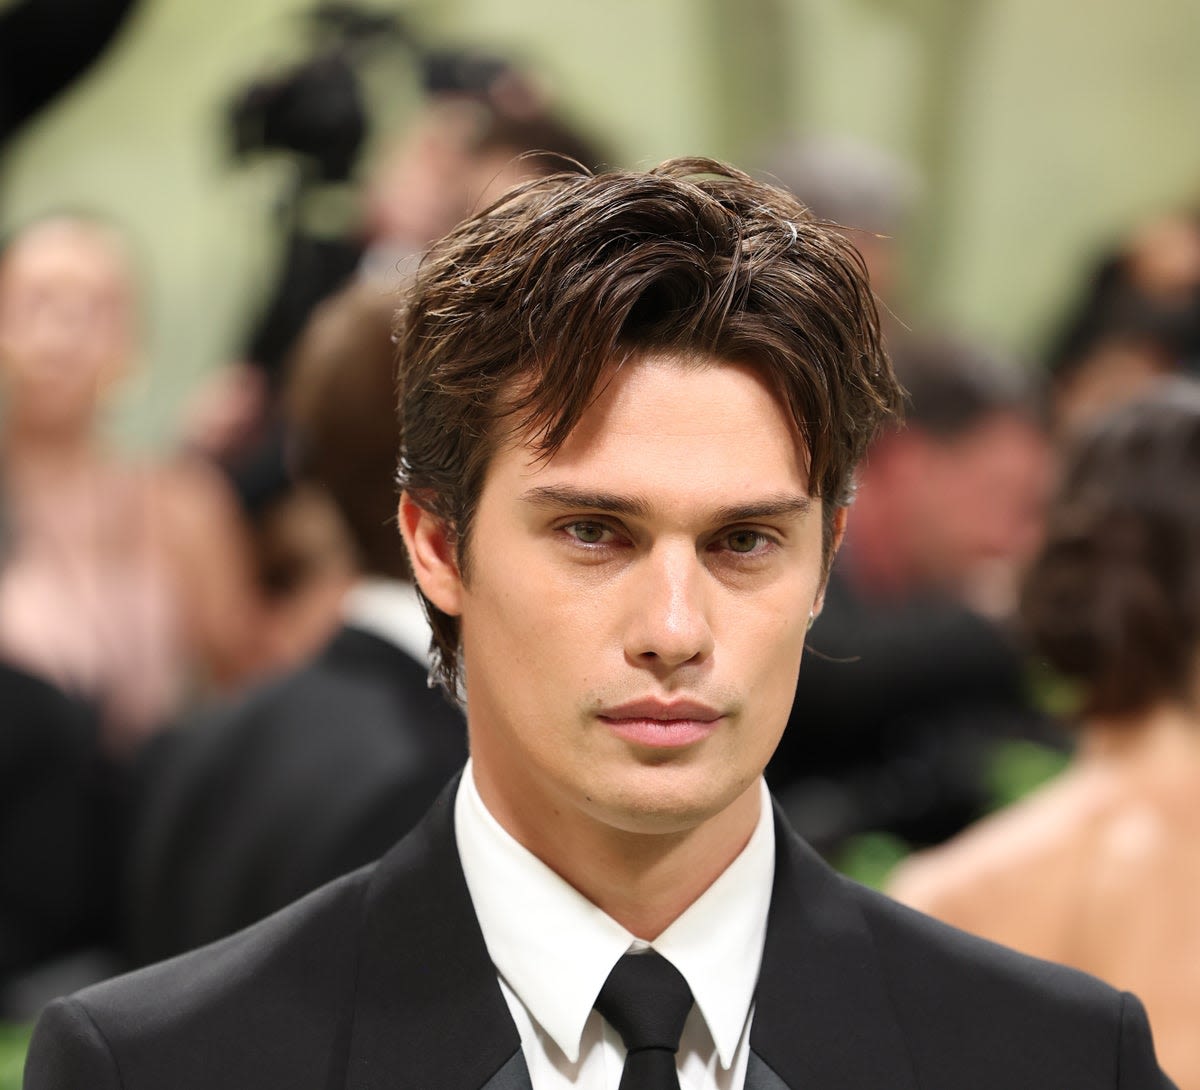 Nicholas Galitzine says he feels ‘uncertainty’ and ‘perhaps guilt’ about playing queer roles